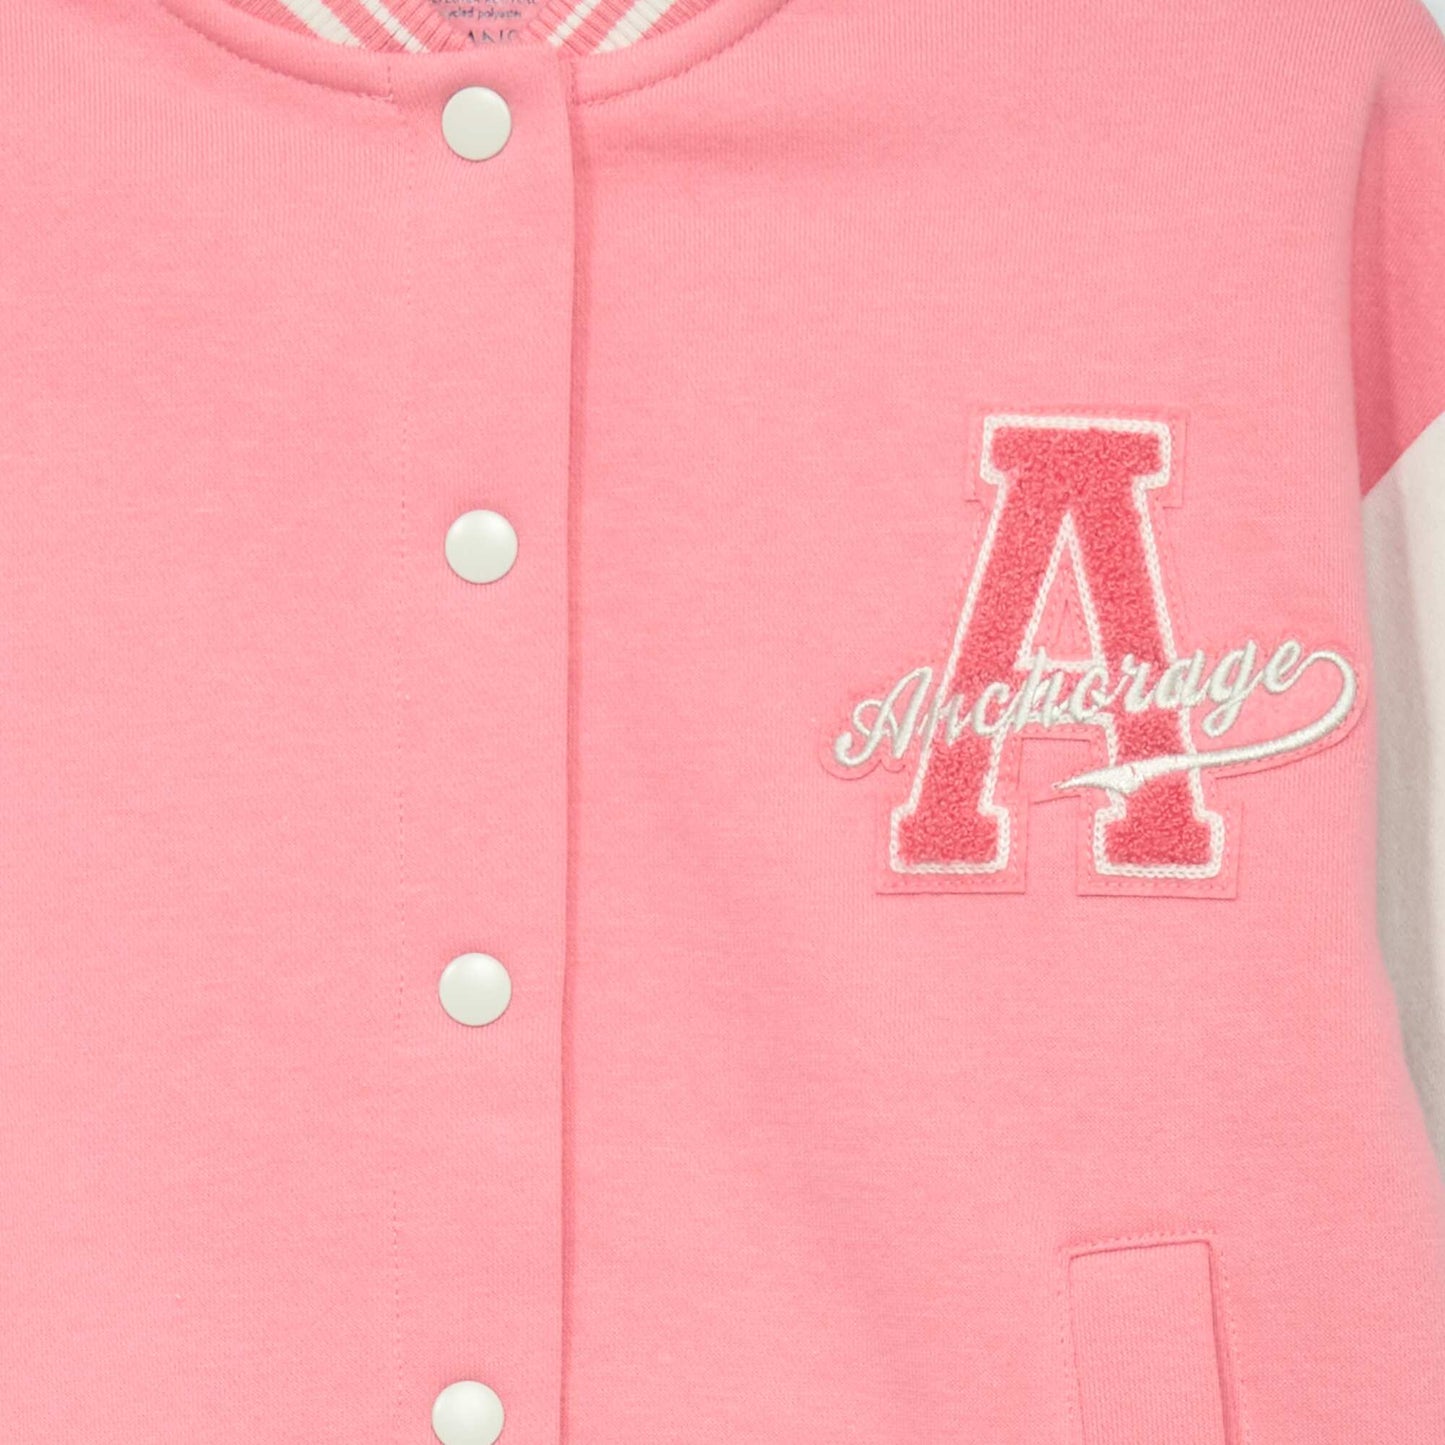 Campus-style jacket Pink